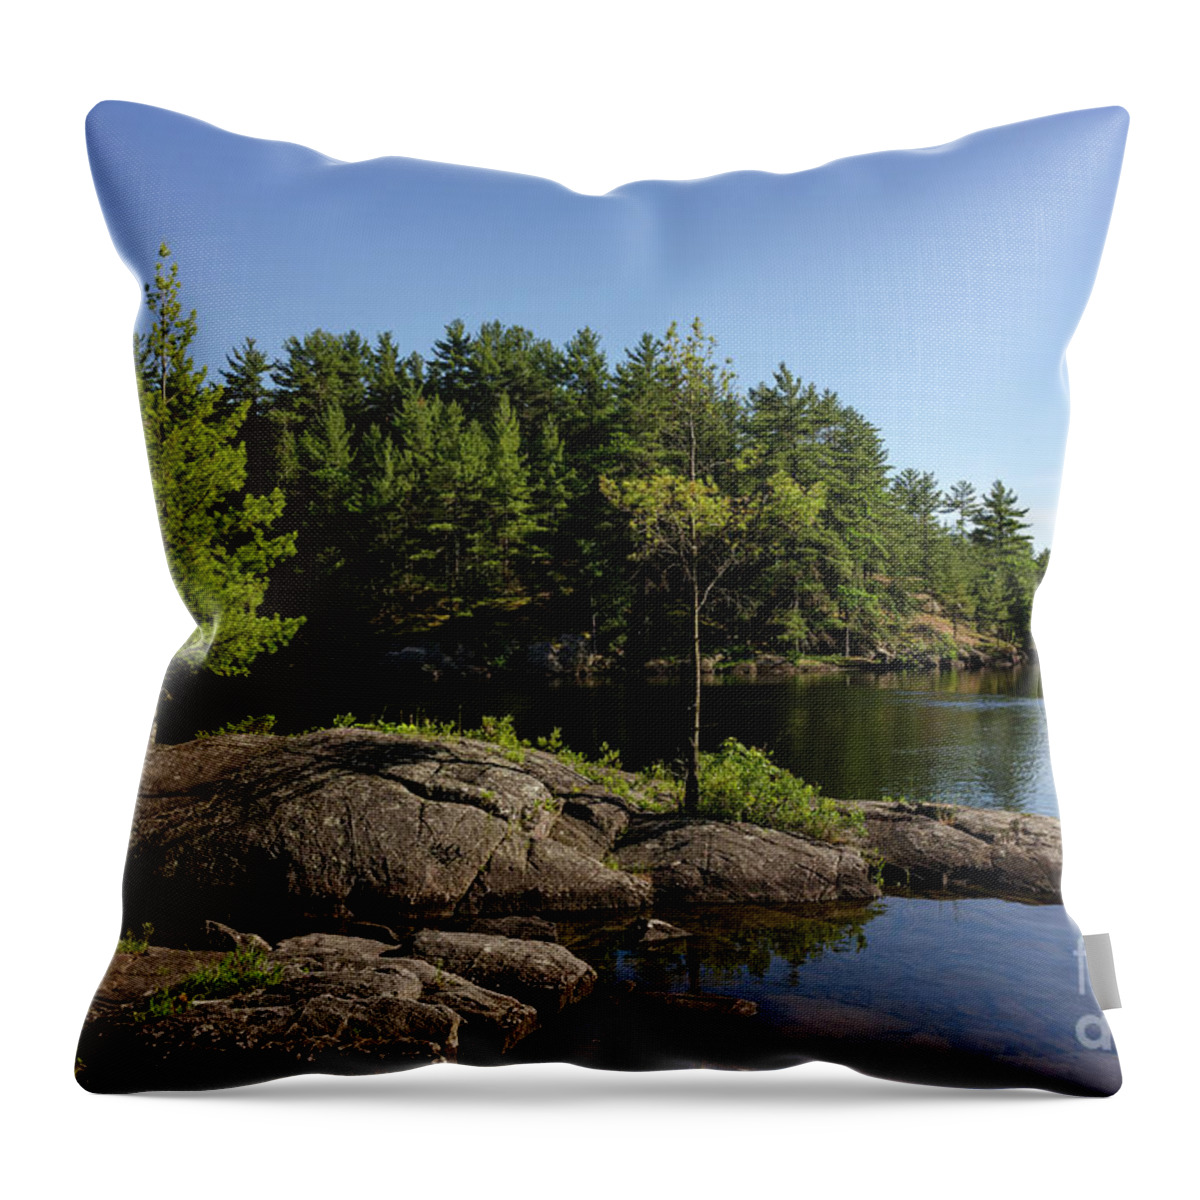 Rocks Throw Pillow featuring the photograph Rocky Island On Moon River by Les Palenik